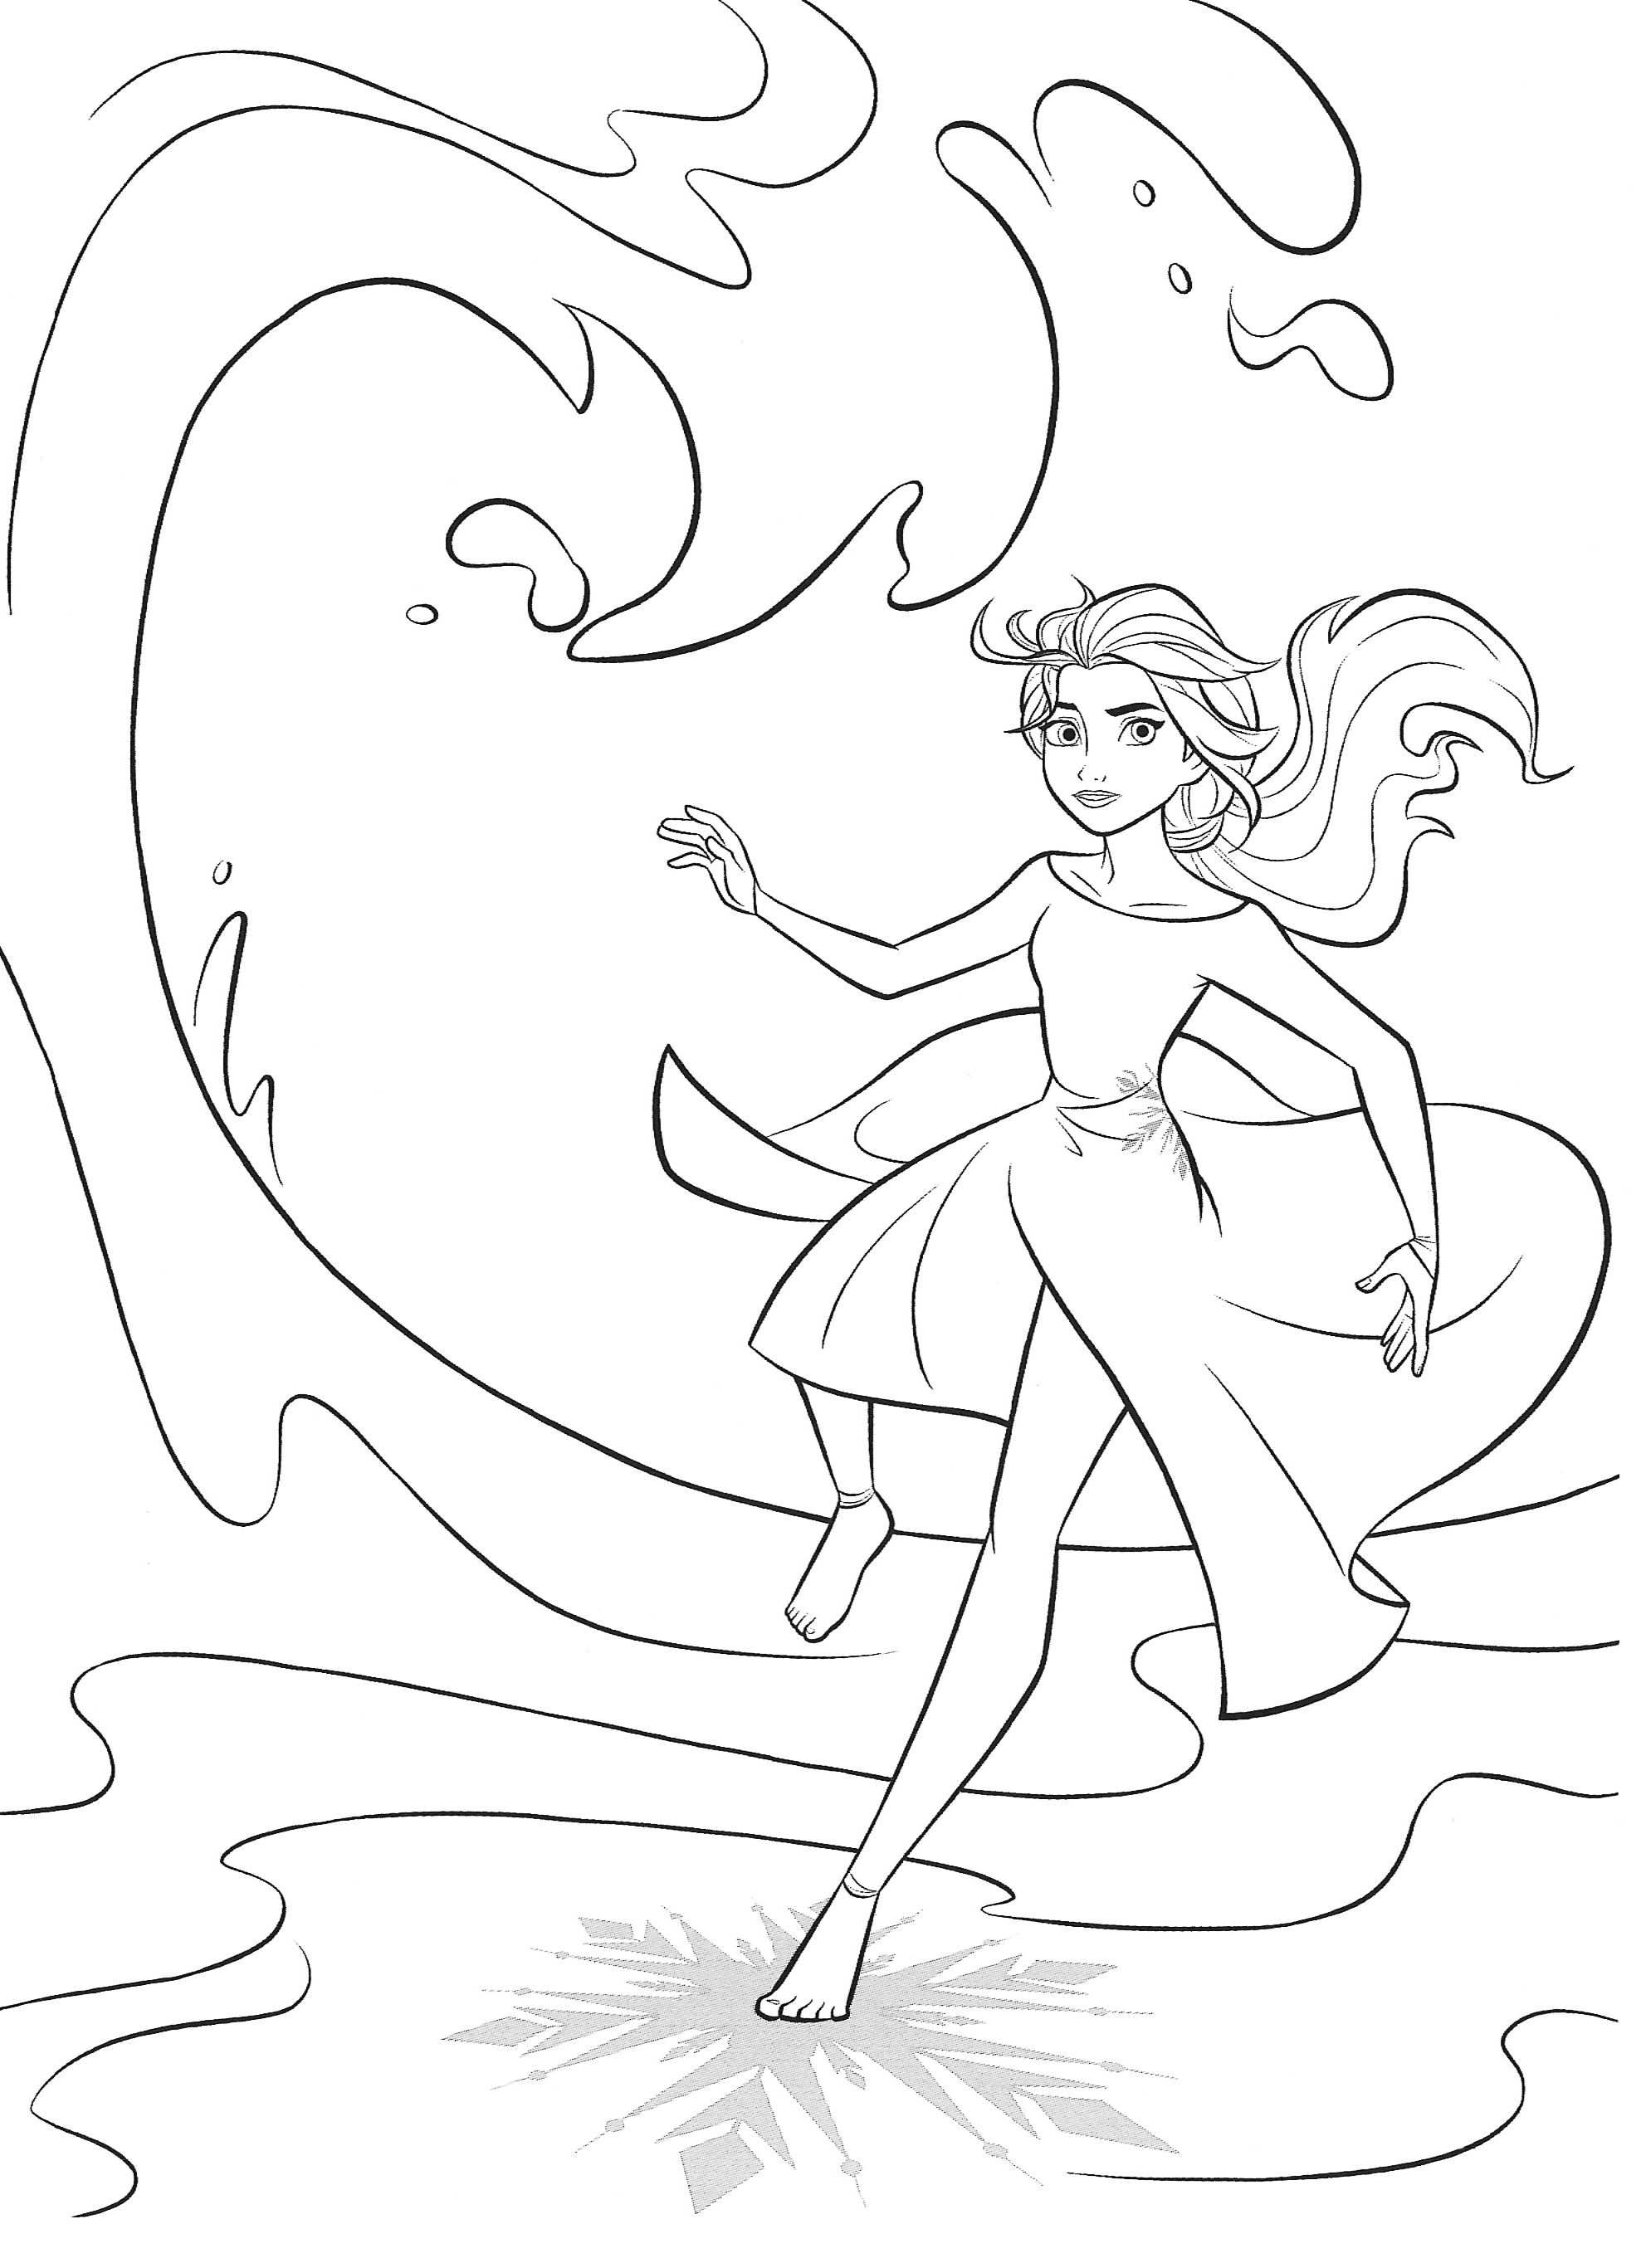 New Frozen 2 Coloring Pages With Elsa In 2020 With Images